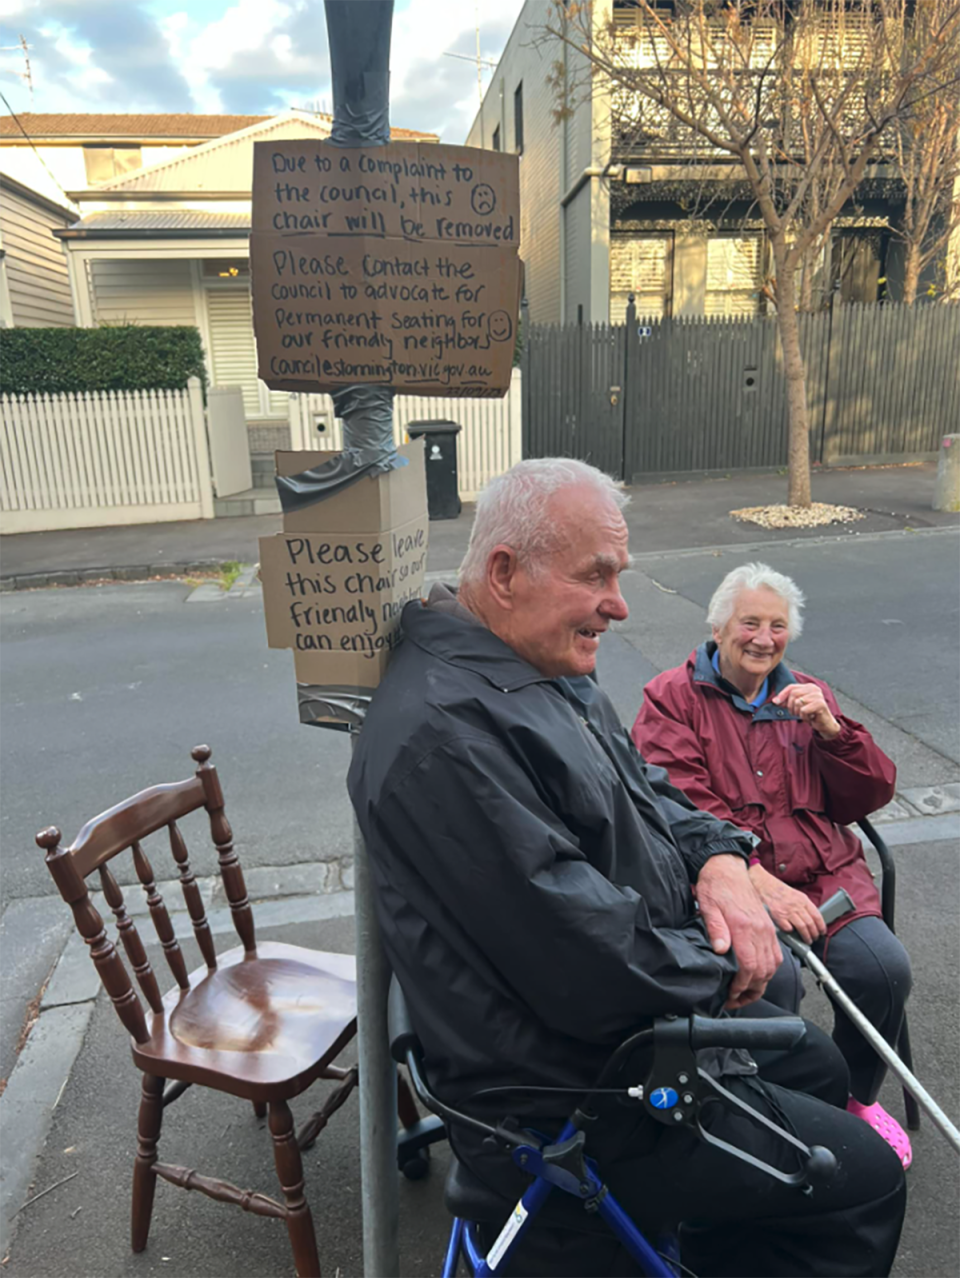 The elderly couple sitting in the chairs provided by locals on Westbourne Street in Melbourne. The cardboard signs can be seen taped to a pole behind them.